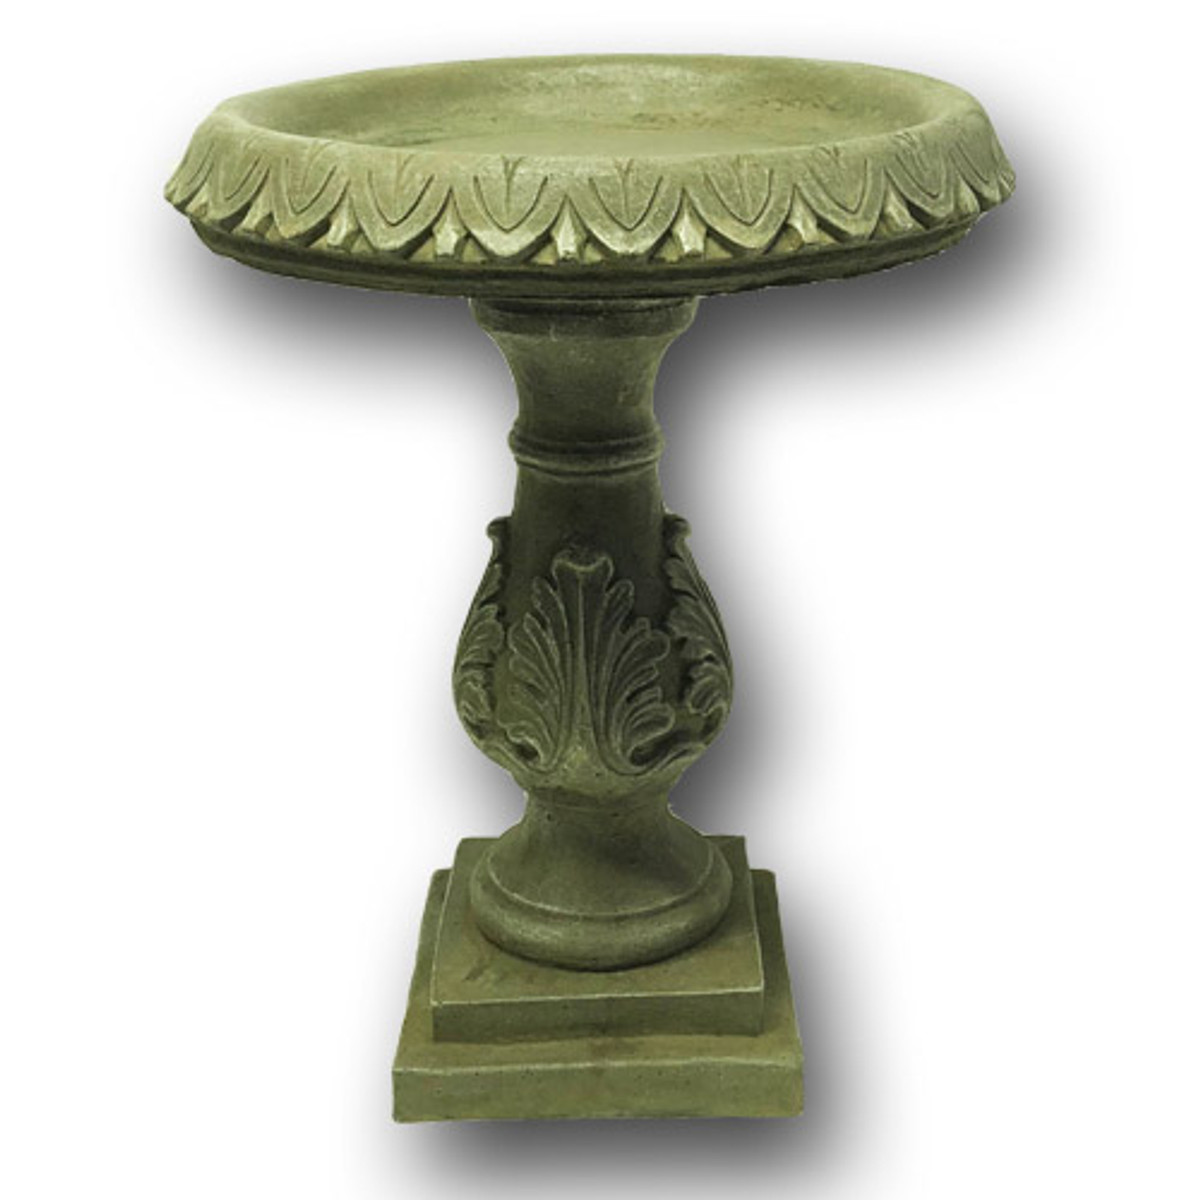 Hand sculpted garden classical stone birdbath from Athena Garden make wonderful Mother's Day and Father's Day gifts. This cast stone leaf birdbath is a unique design that has high quality and personality, decorative concrete garden birdbath, large stone bird bath, gifts for all occasions. classical stone bird bath, concrete bird bath, cast stone bird bath, outdoor bird bath, garden decor, hand made bird bath